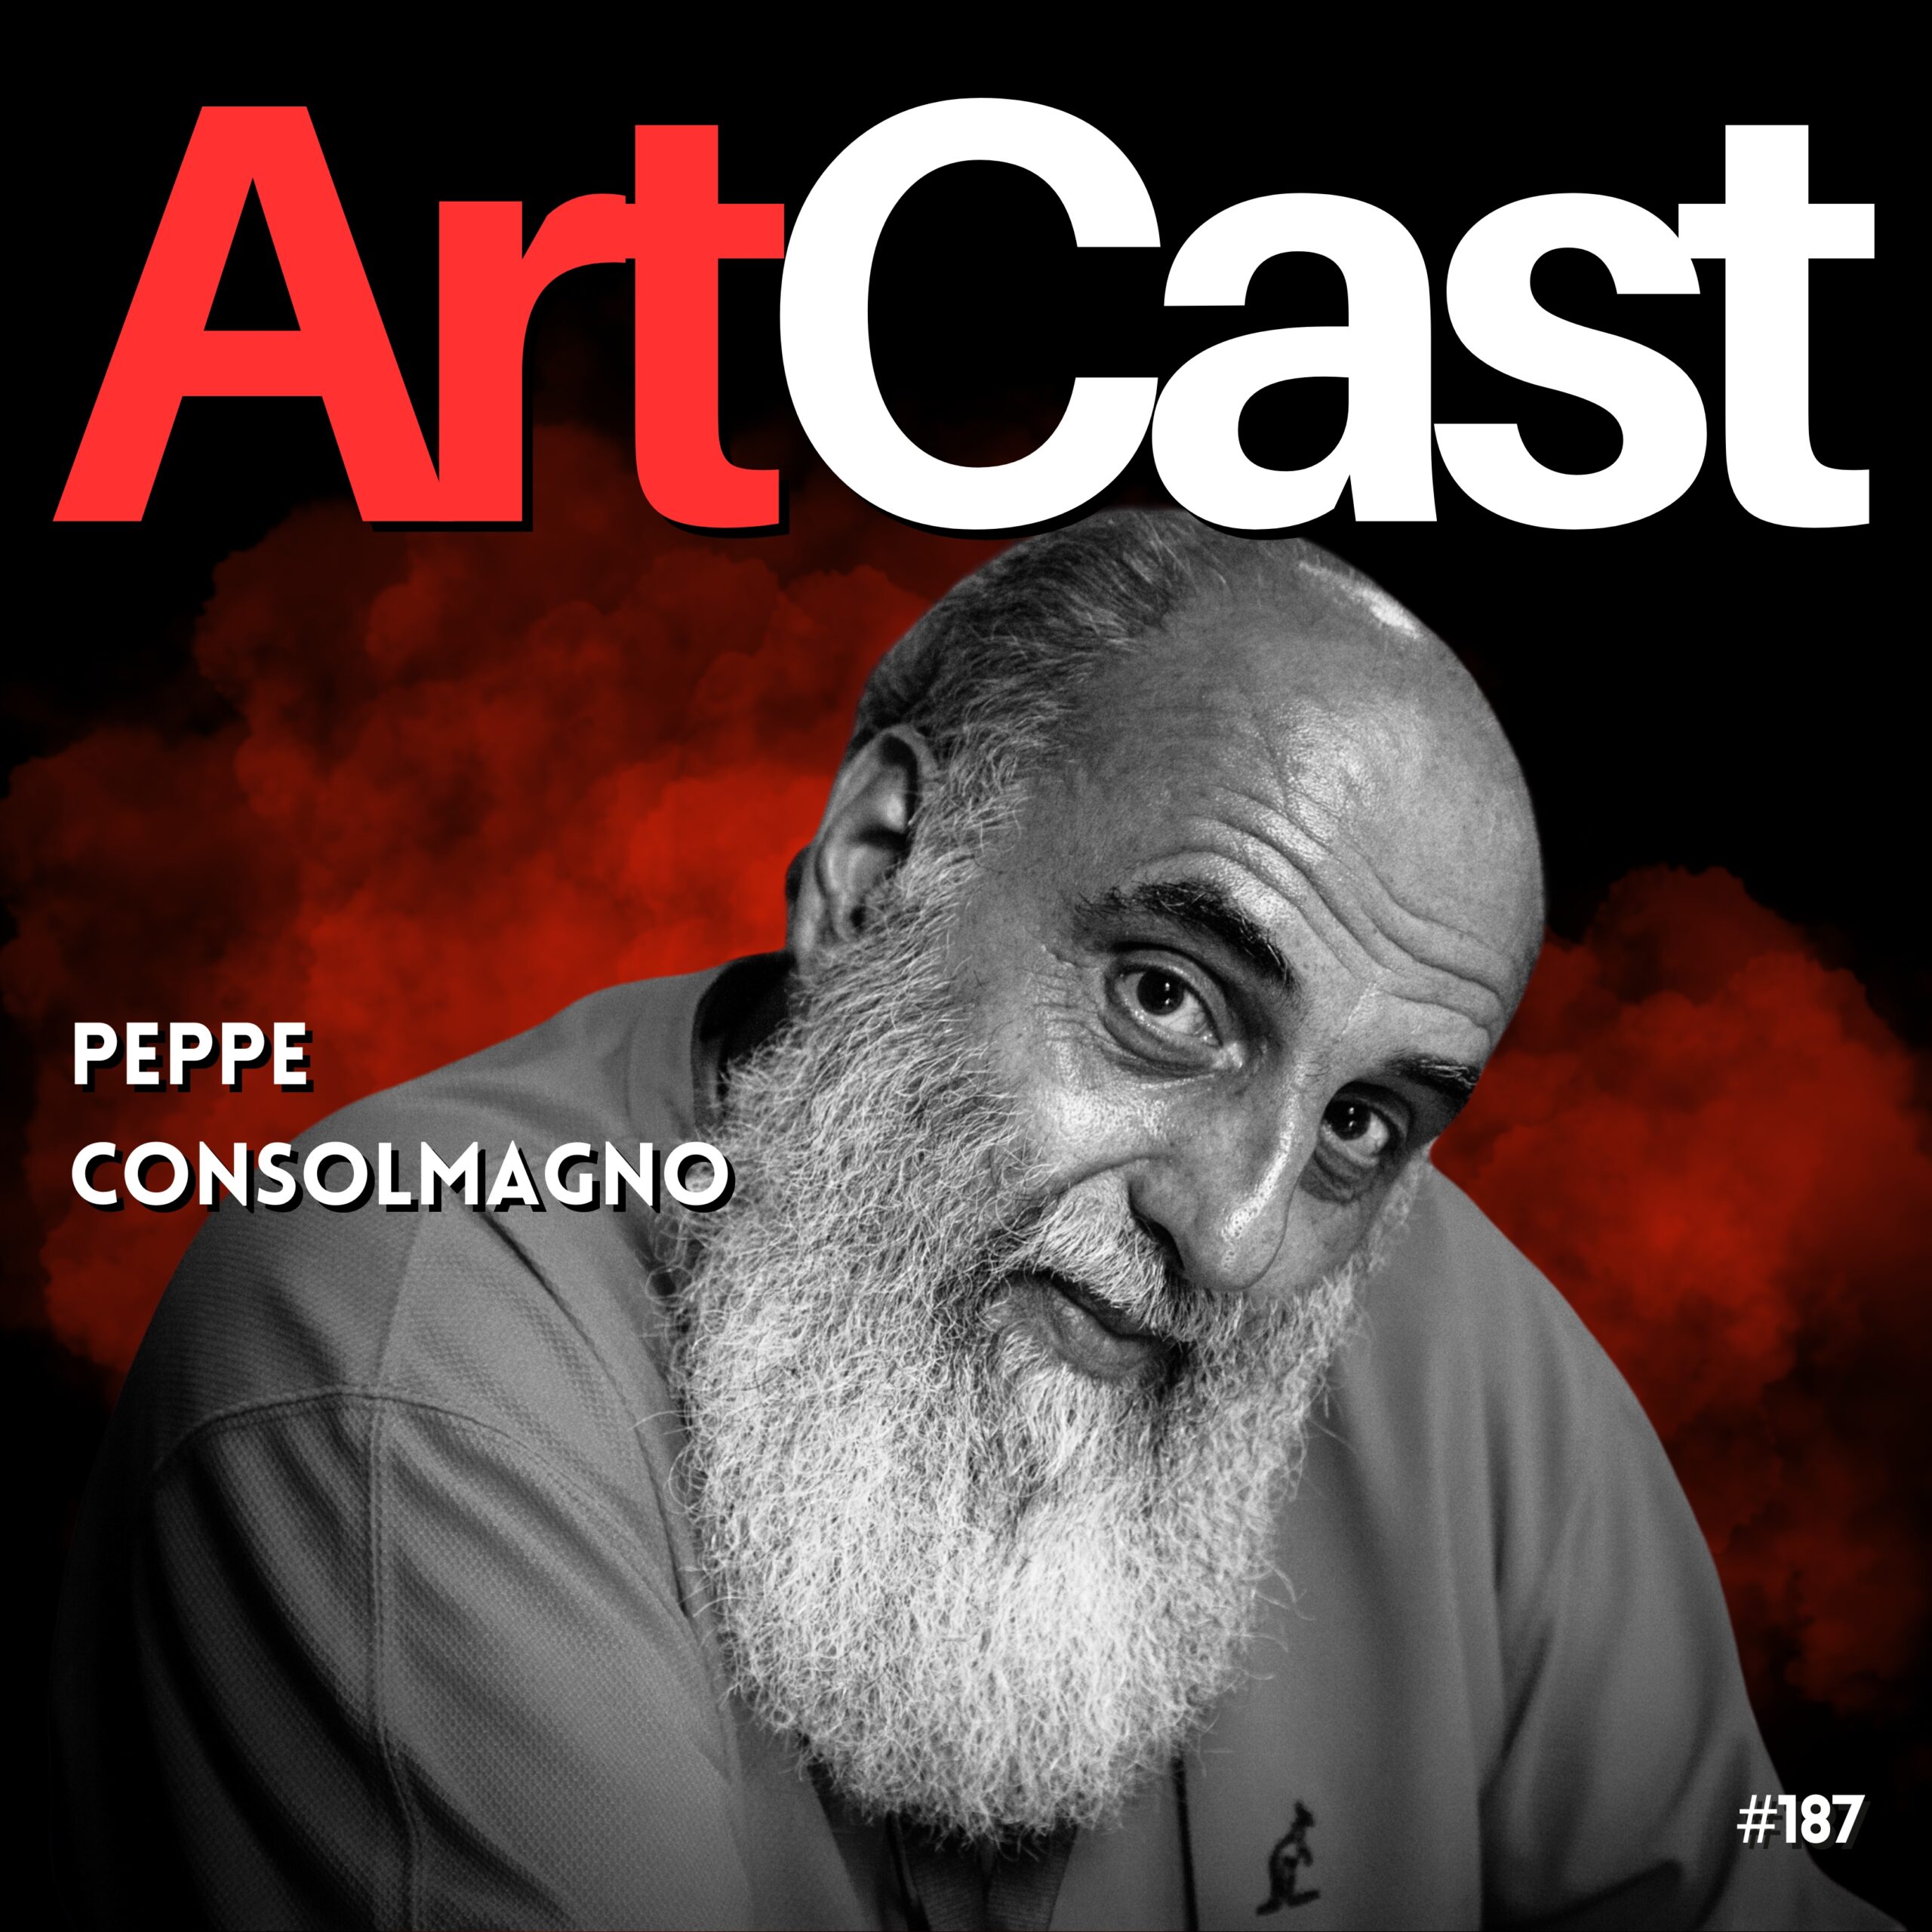 PEPPE CONSOLMAGNO